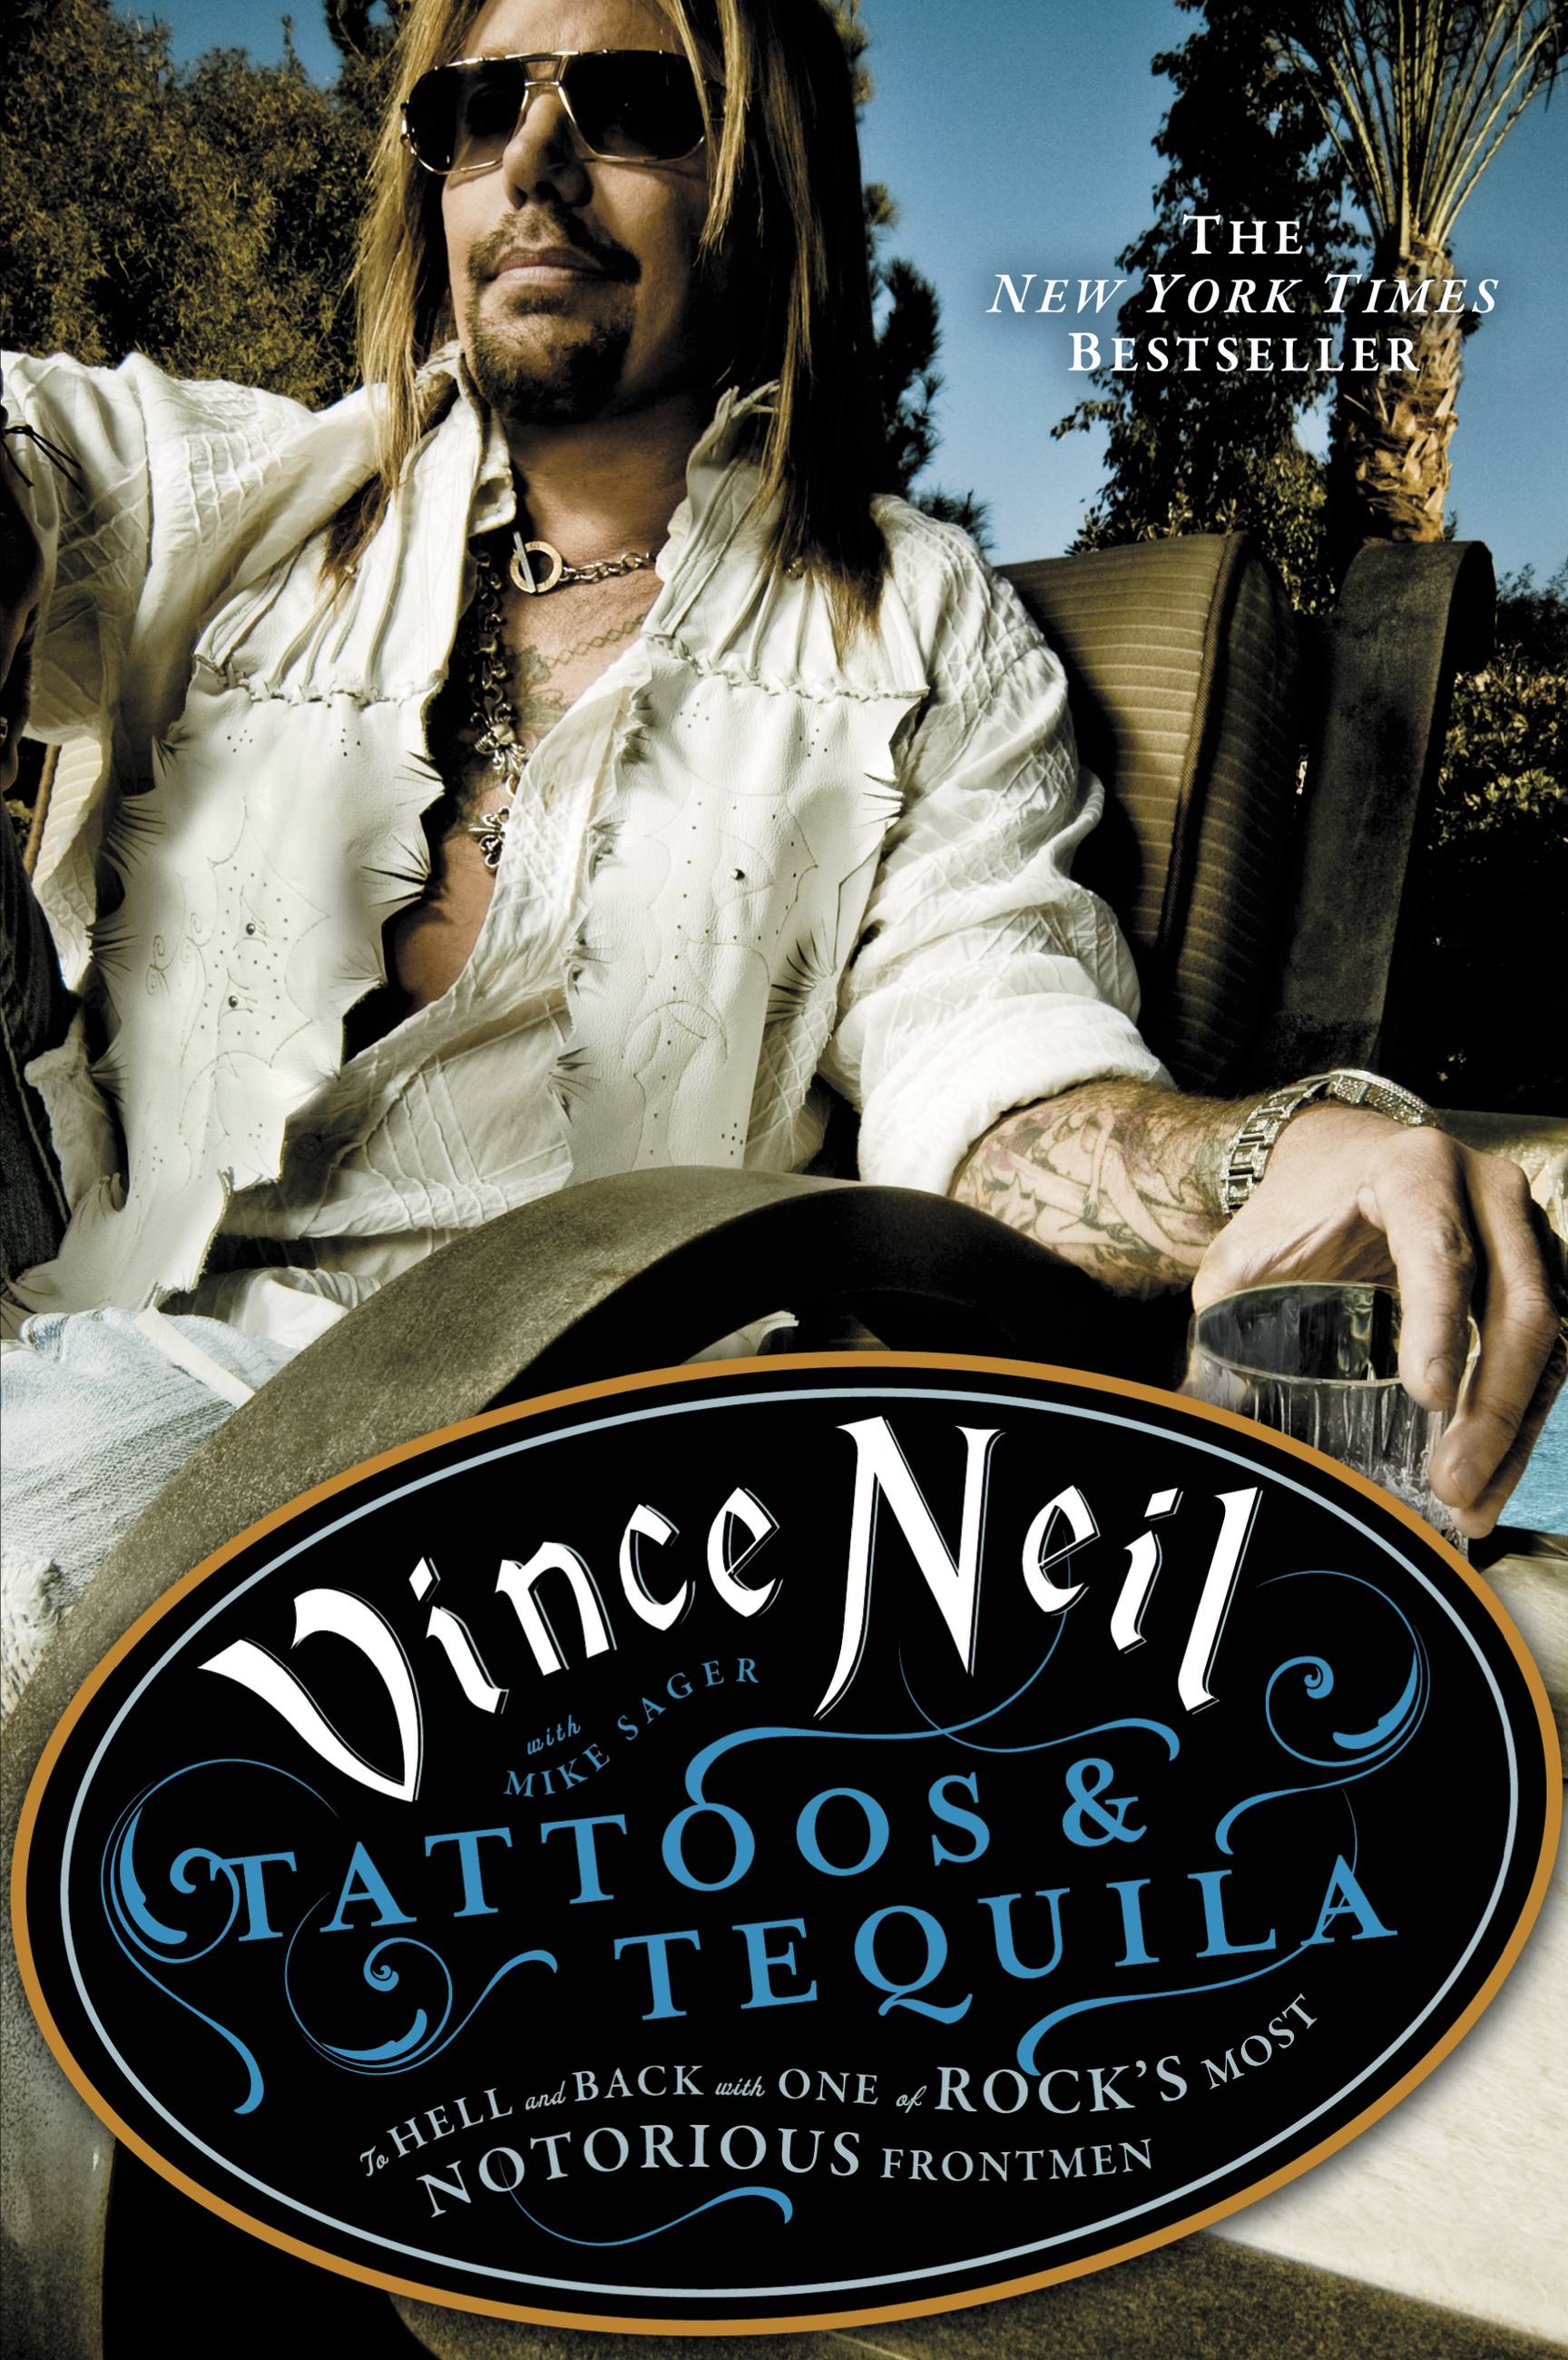 Petite Huge Cock Teen - Tattoos & Tequila by Vince Neil | Hachette Book Group